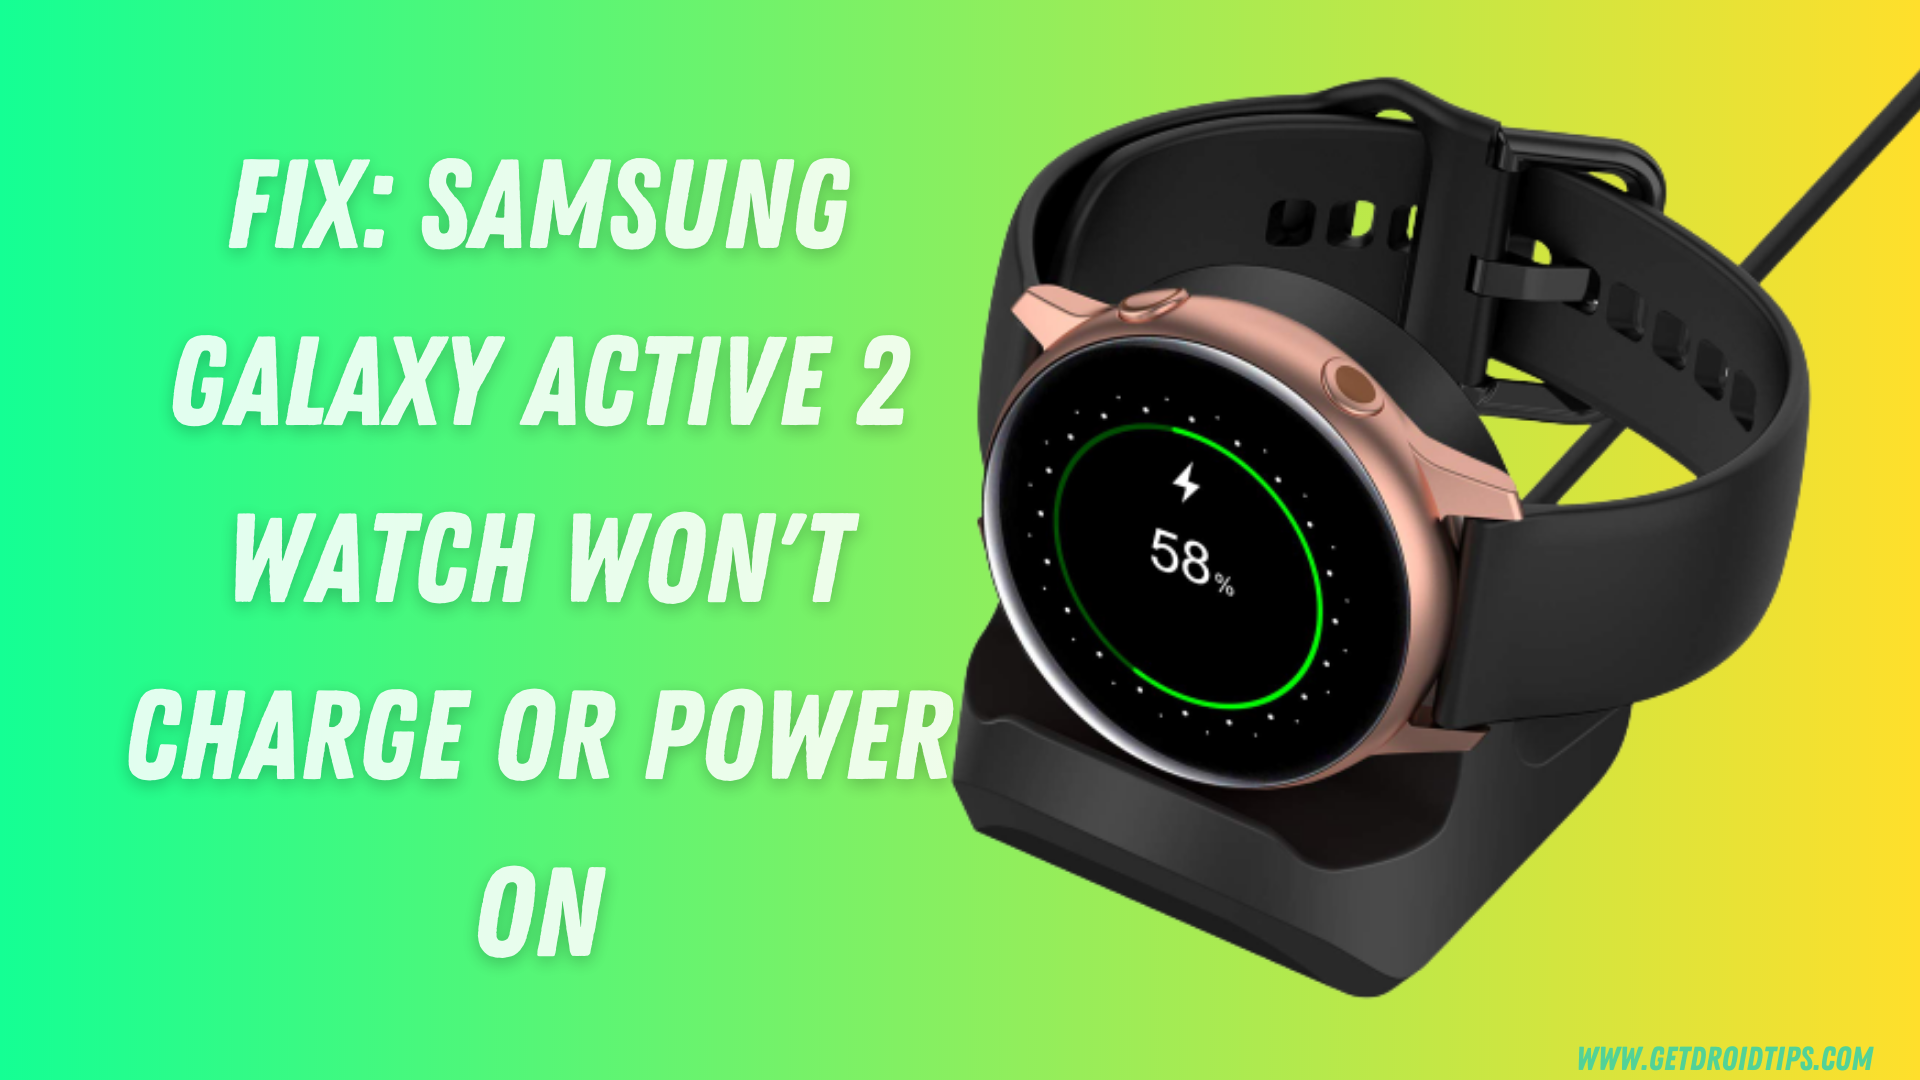 Fix: Samsung Galaxy Active 2 Watch Won't Charge or Power On